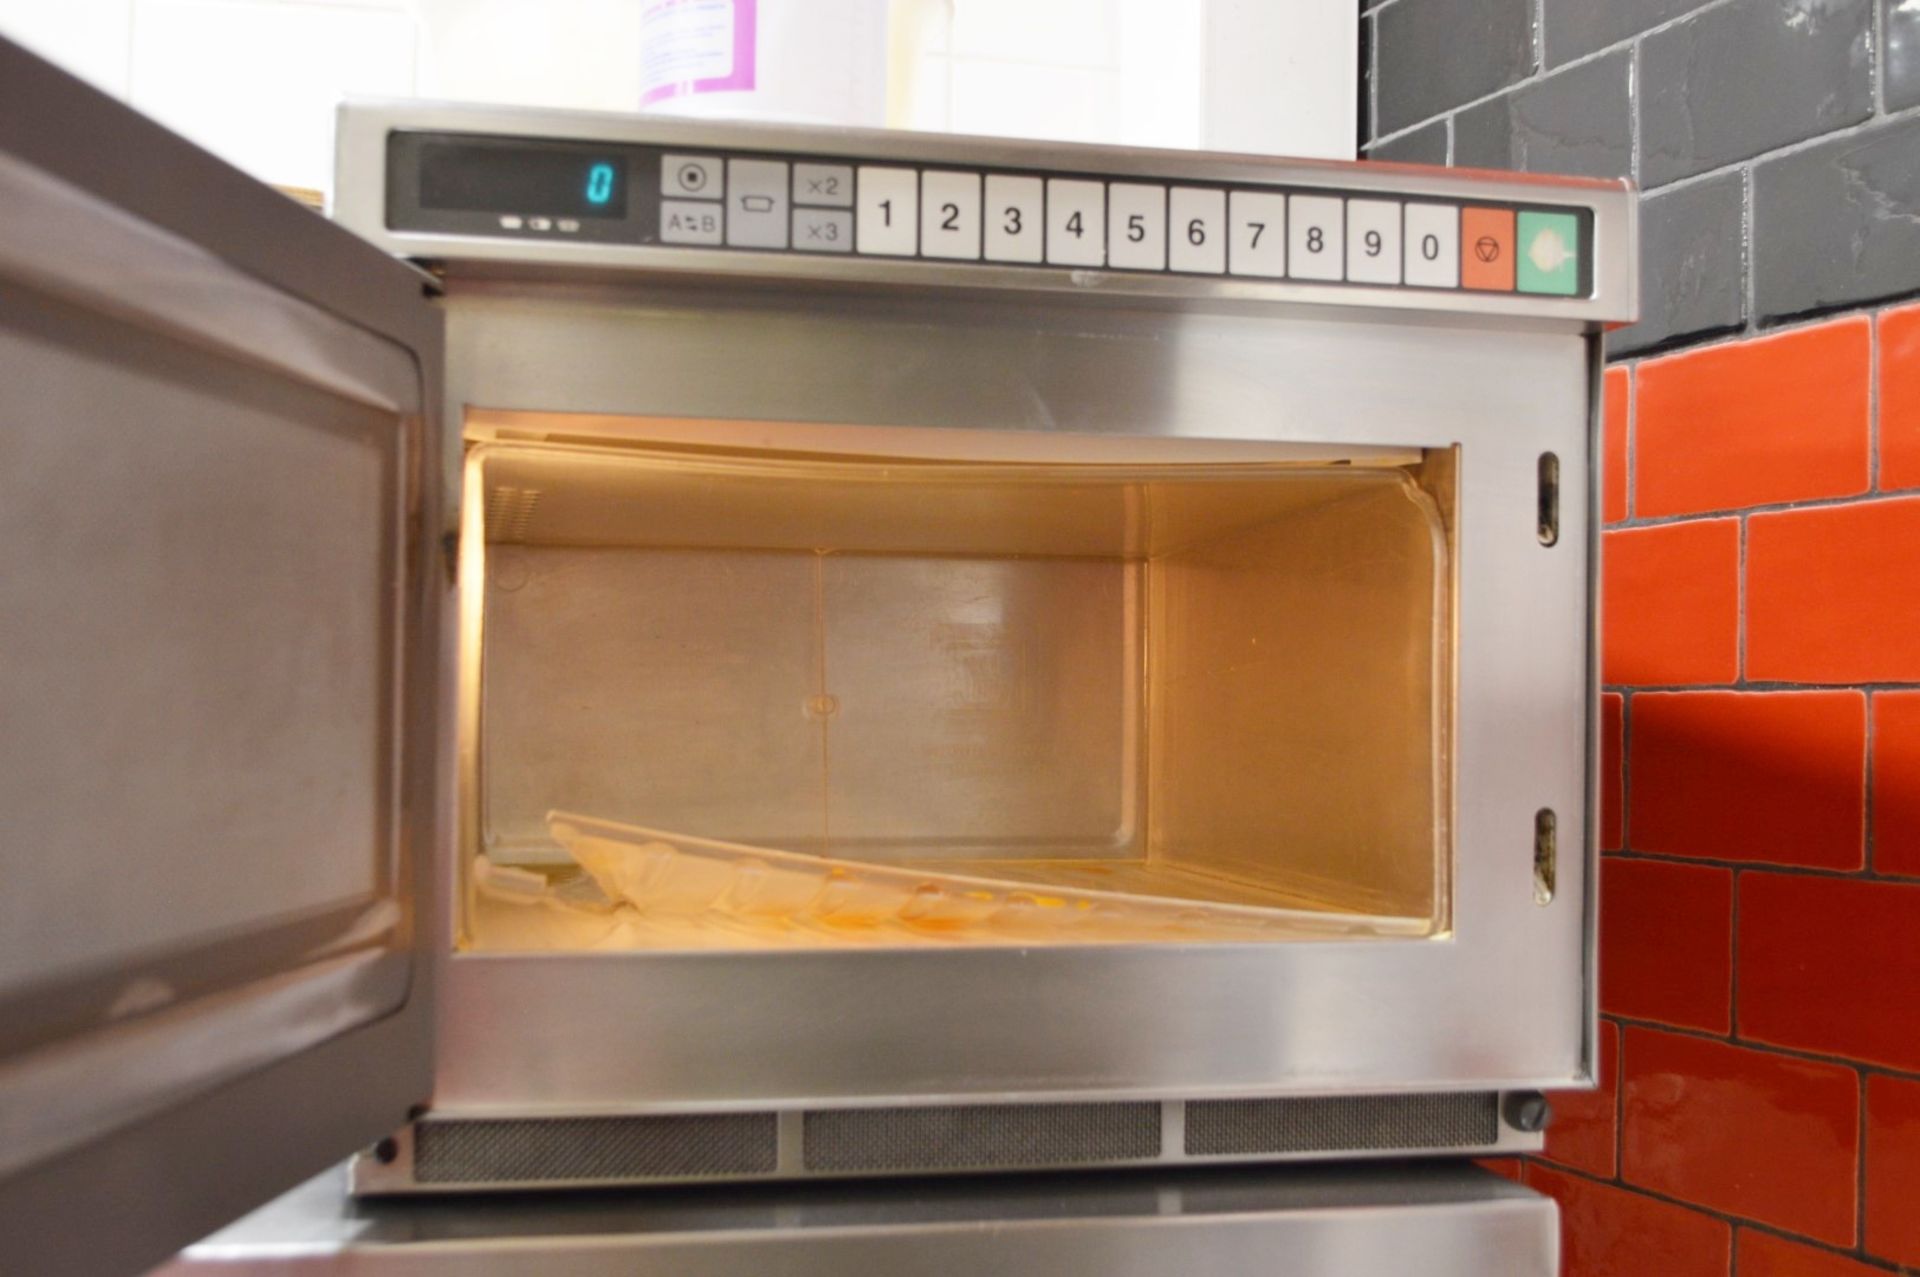 1 x Panasonic Commercial Microwave Oven With Stainless Steel Exterior and Wall Mounted Shelf - Ref - Image 3 of 3